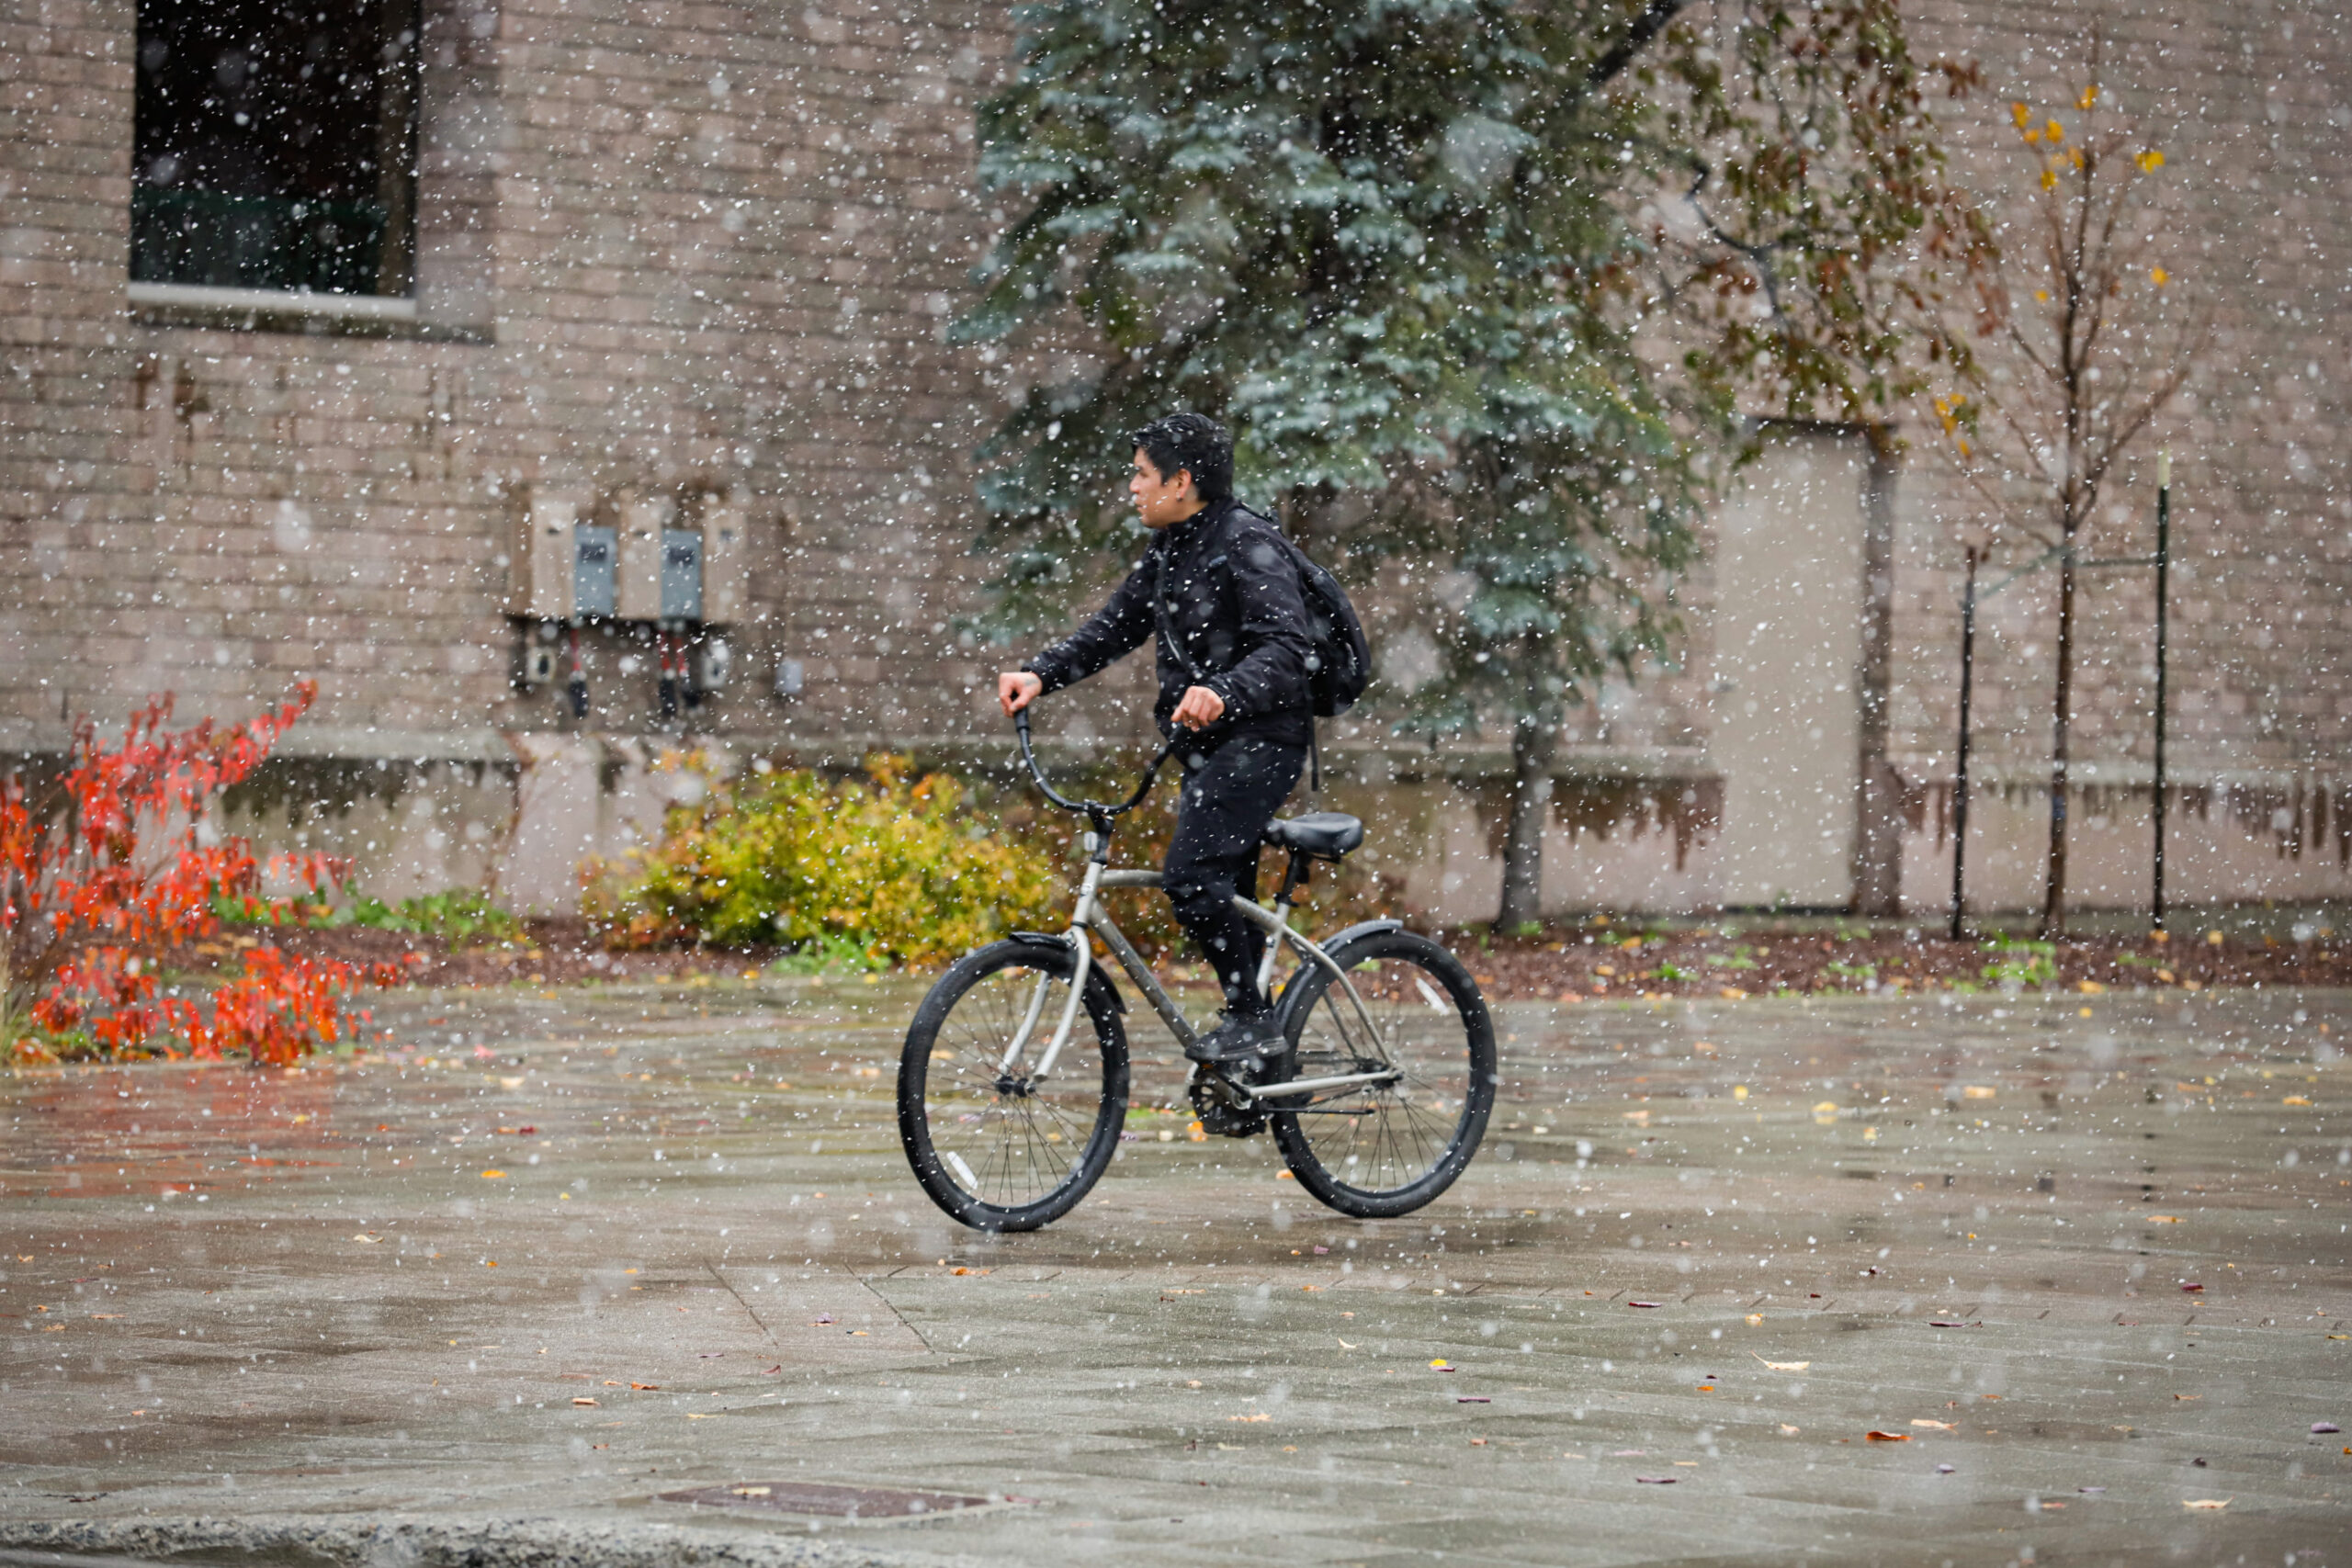 A man on bicycle riding in the snow